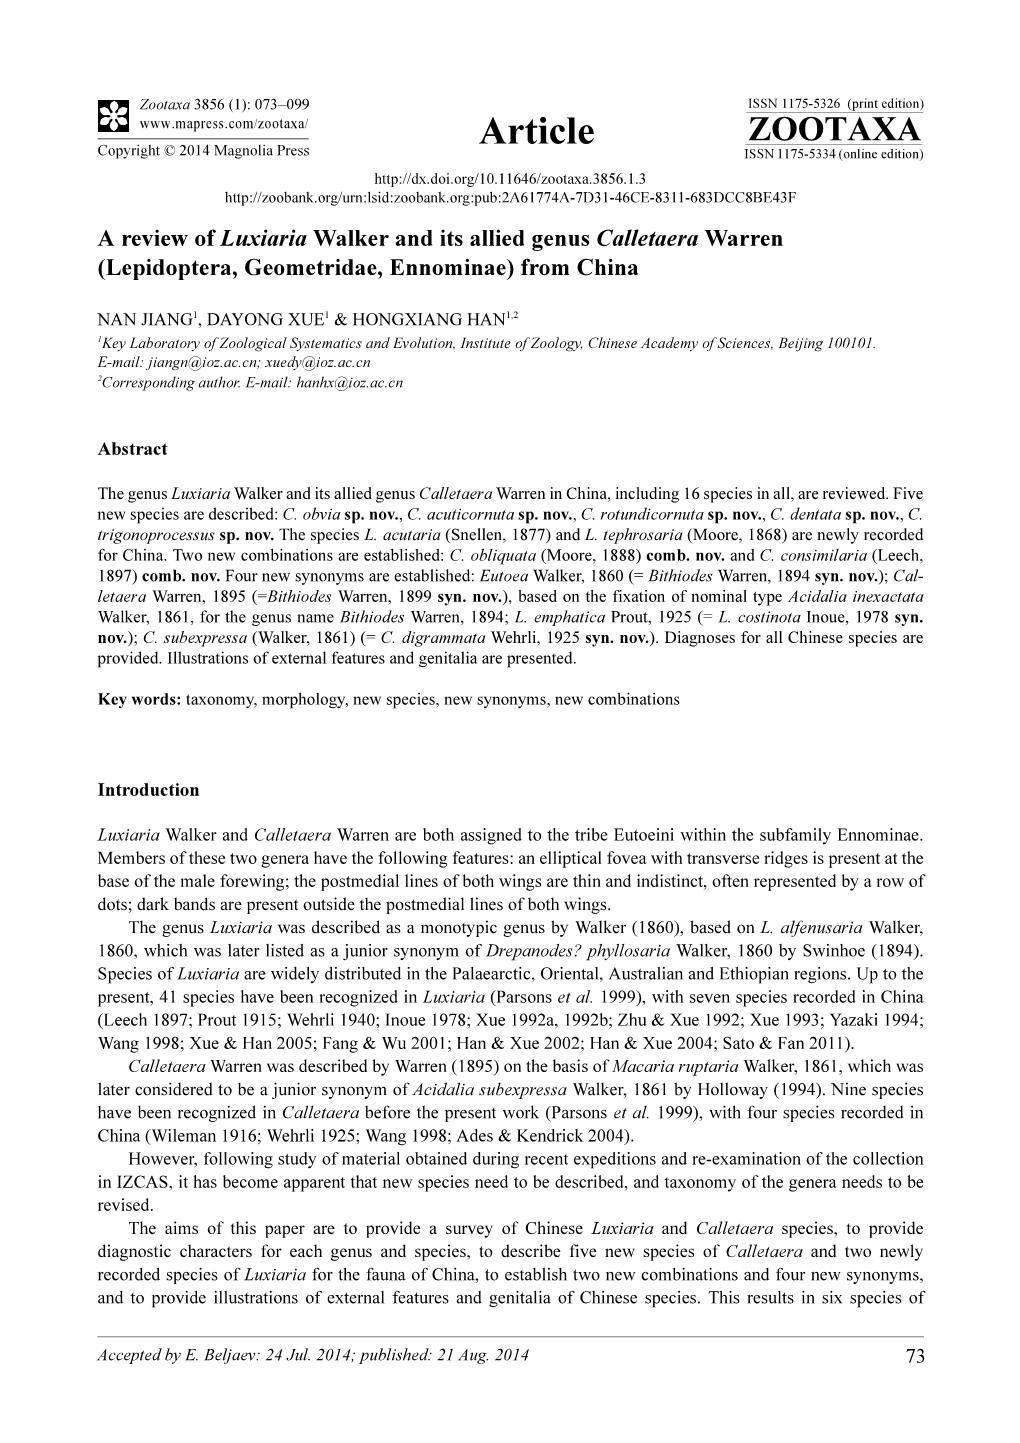 A Review of Luxiaria Walker and Its Allied Genus Calletaera Warren (Lepidoptera, Geometridae, Ennominae) from China